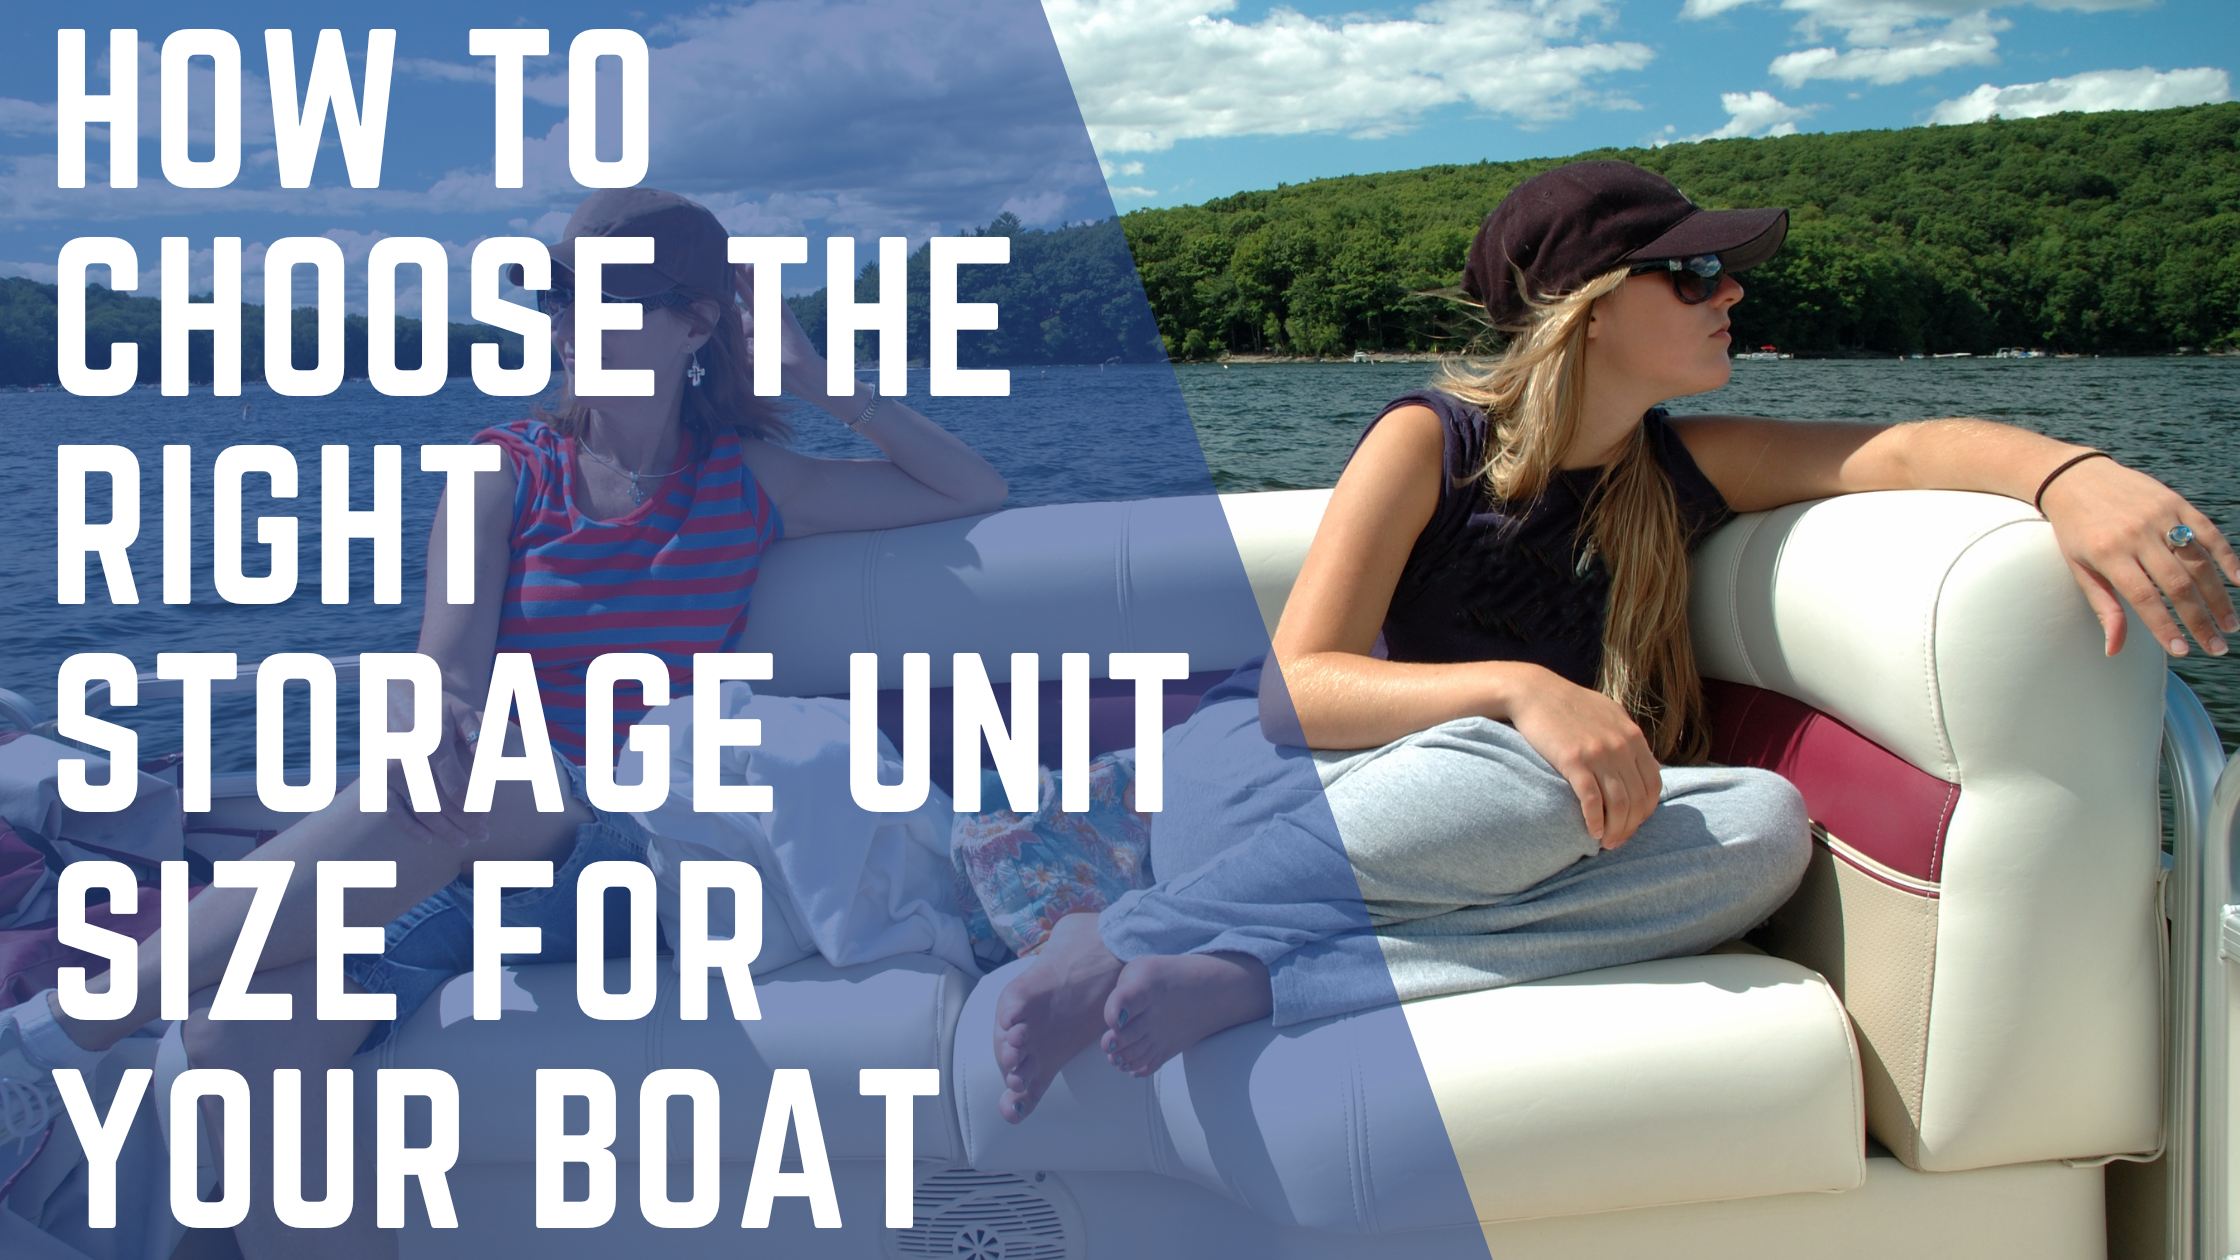 Finding the Right Size of Storage Unit for Your Boat